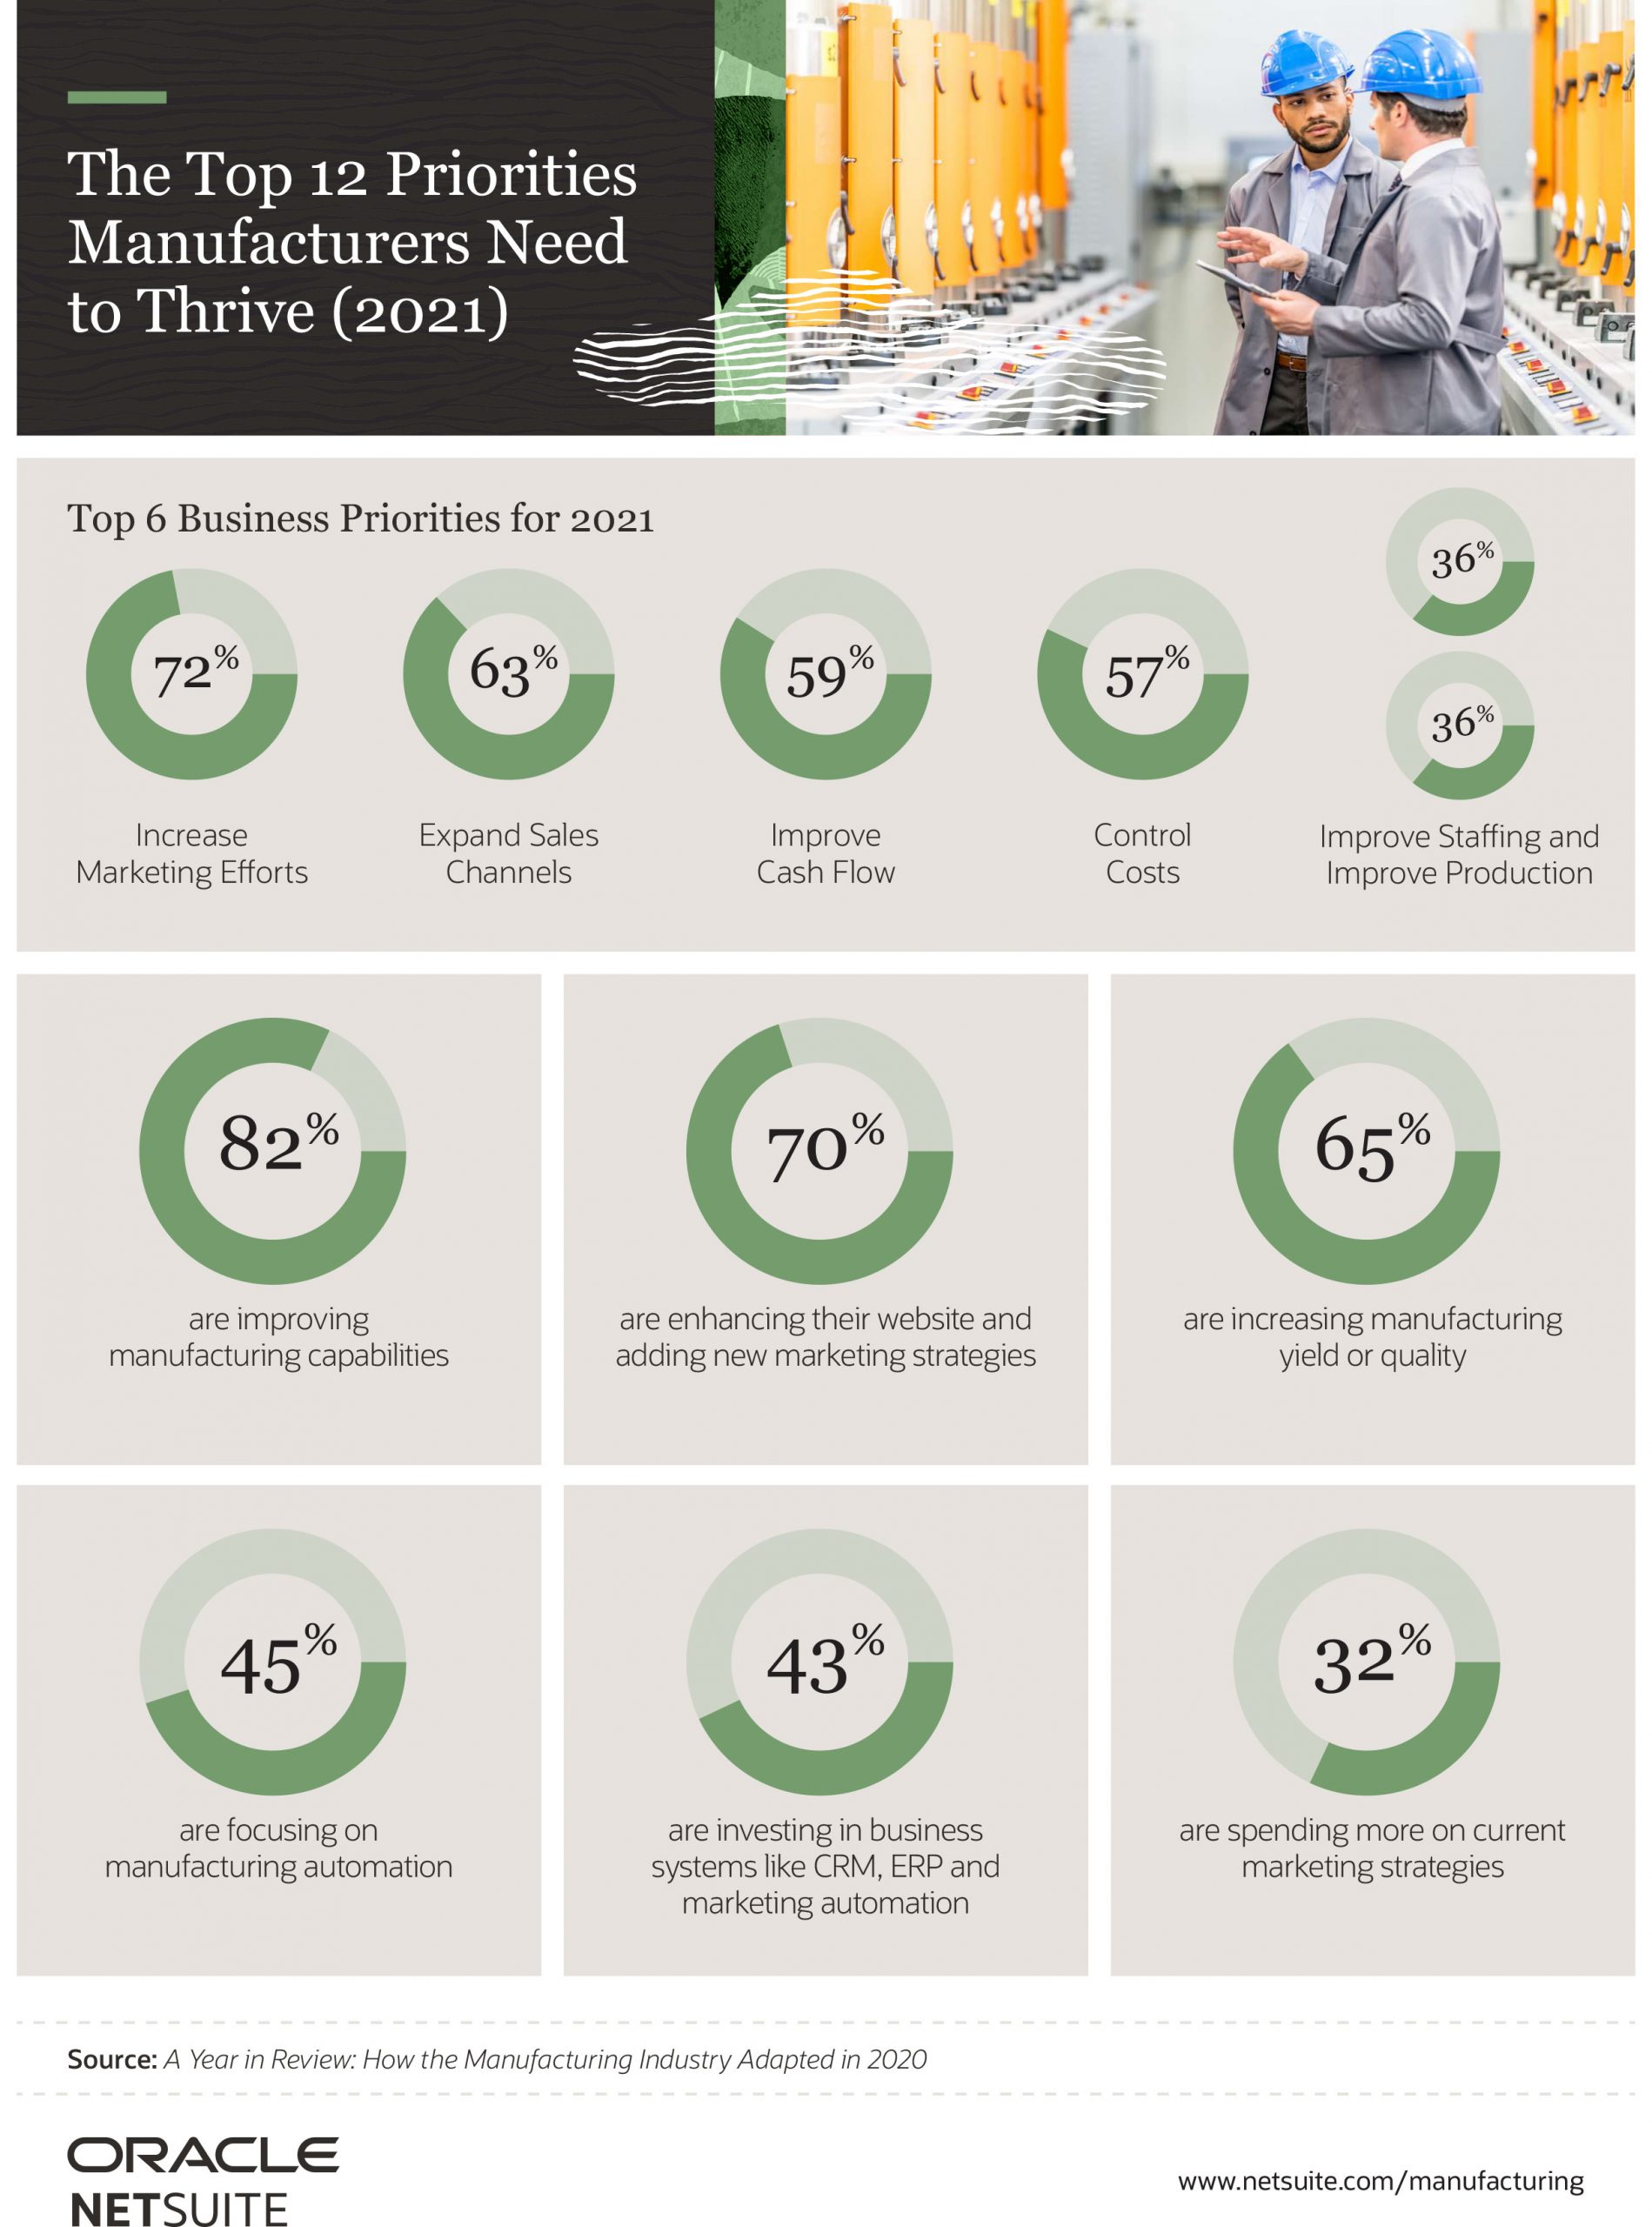 The top 12 priorities manufacturers need to thrive in 2021